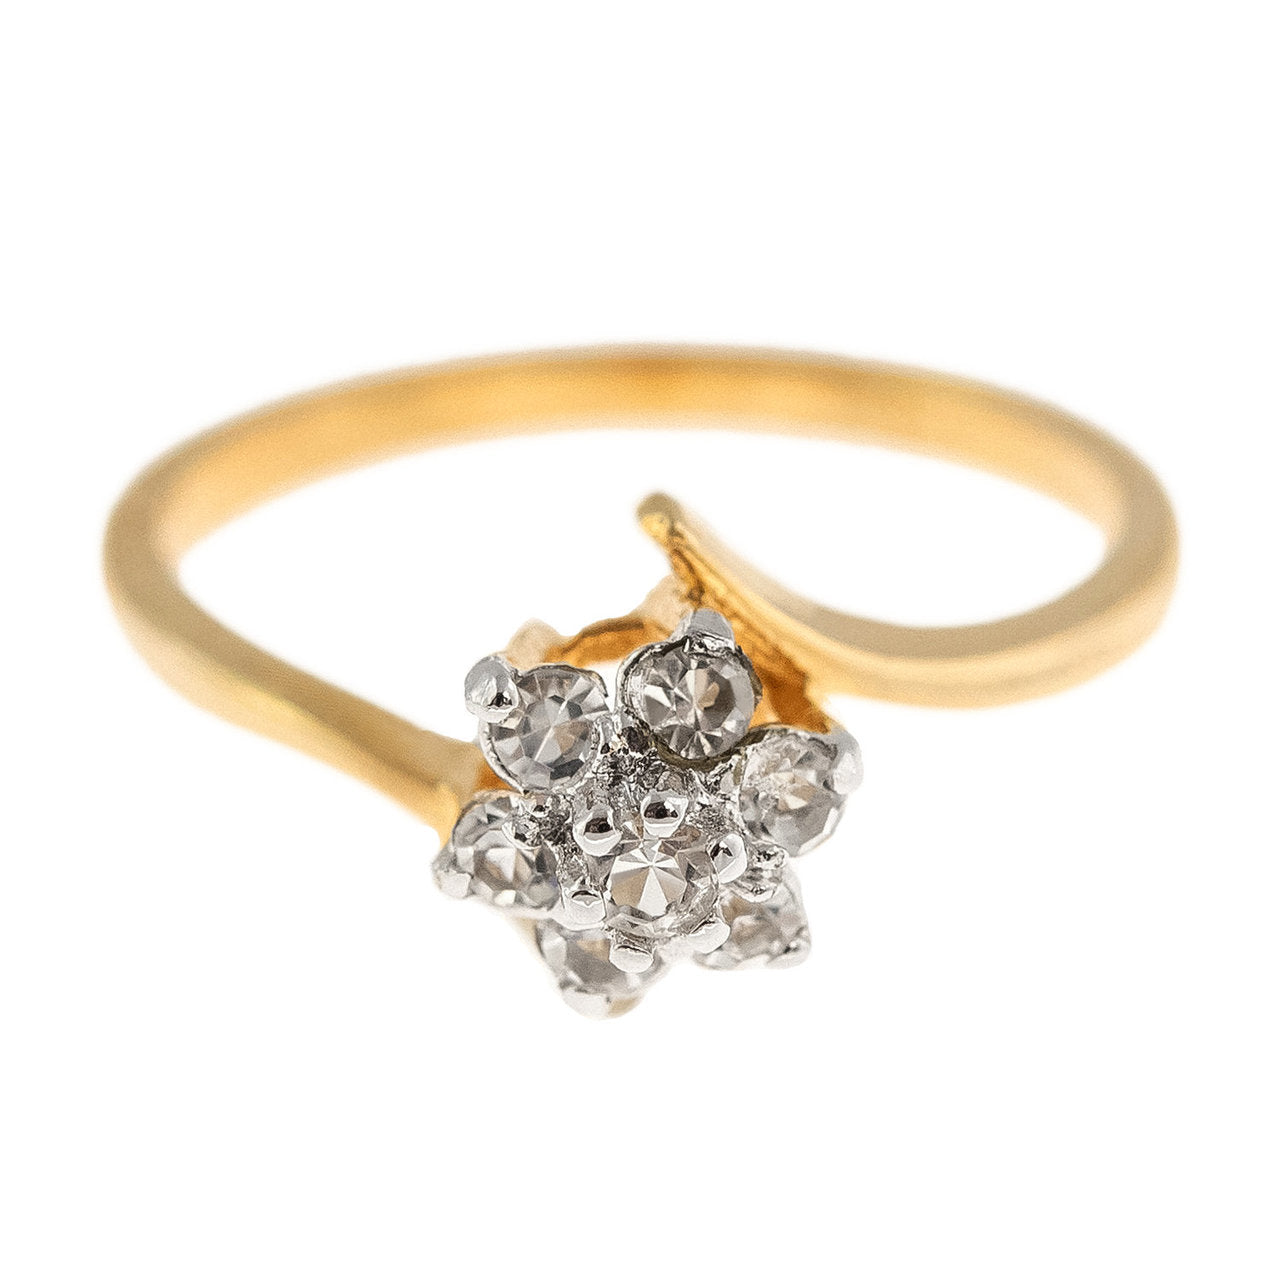 Vintage Jewelry Clear Austrian Crystal Flower Motif Cocktail Ring 18k Yellow Gold Electroplate Size: 5